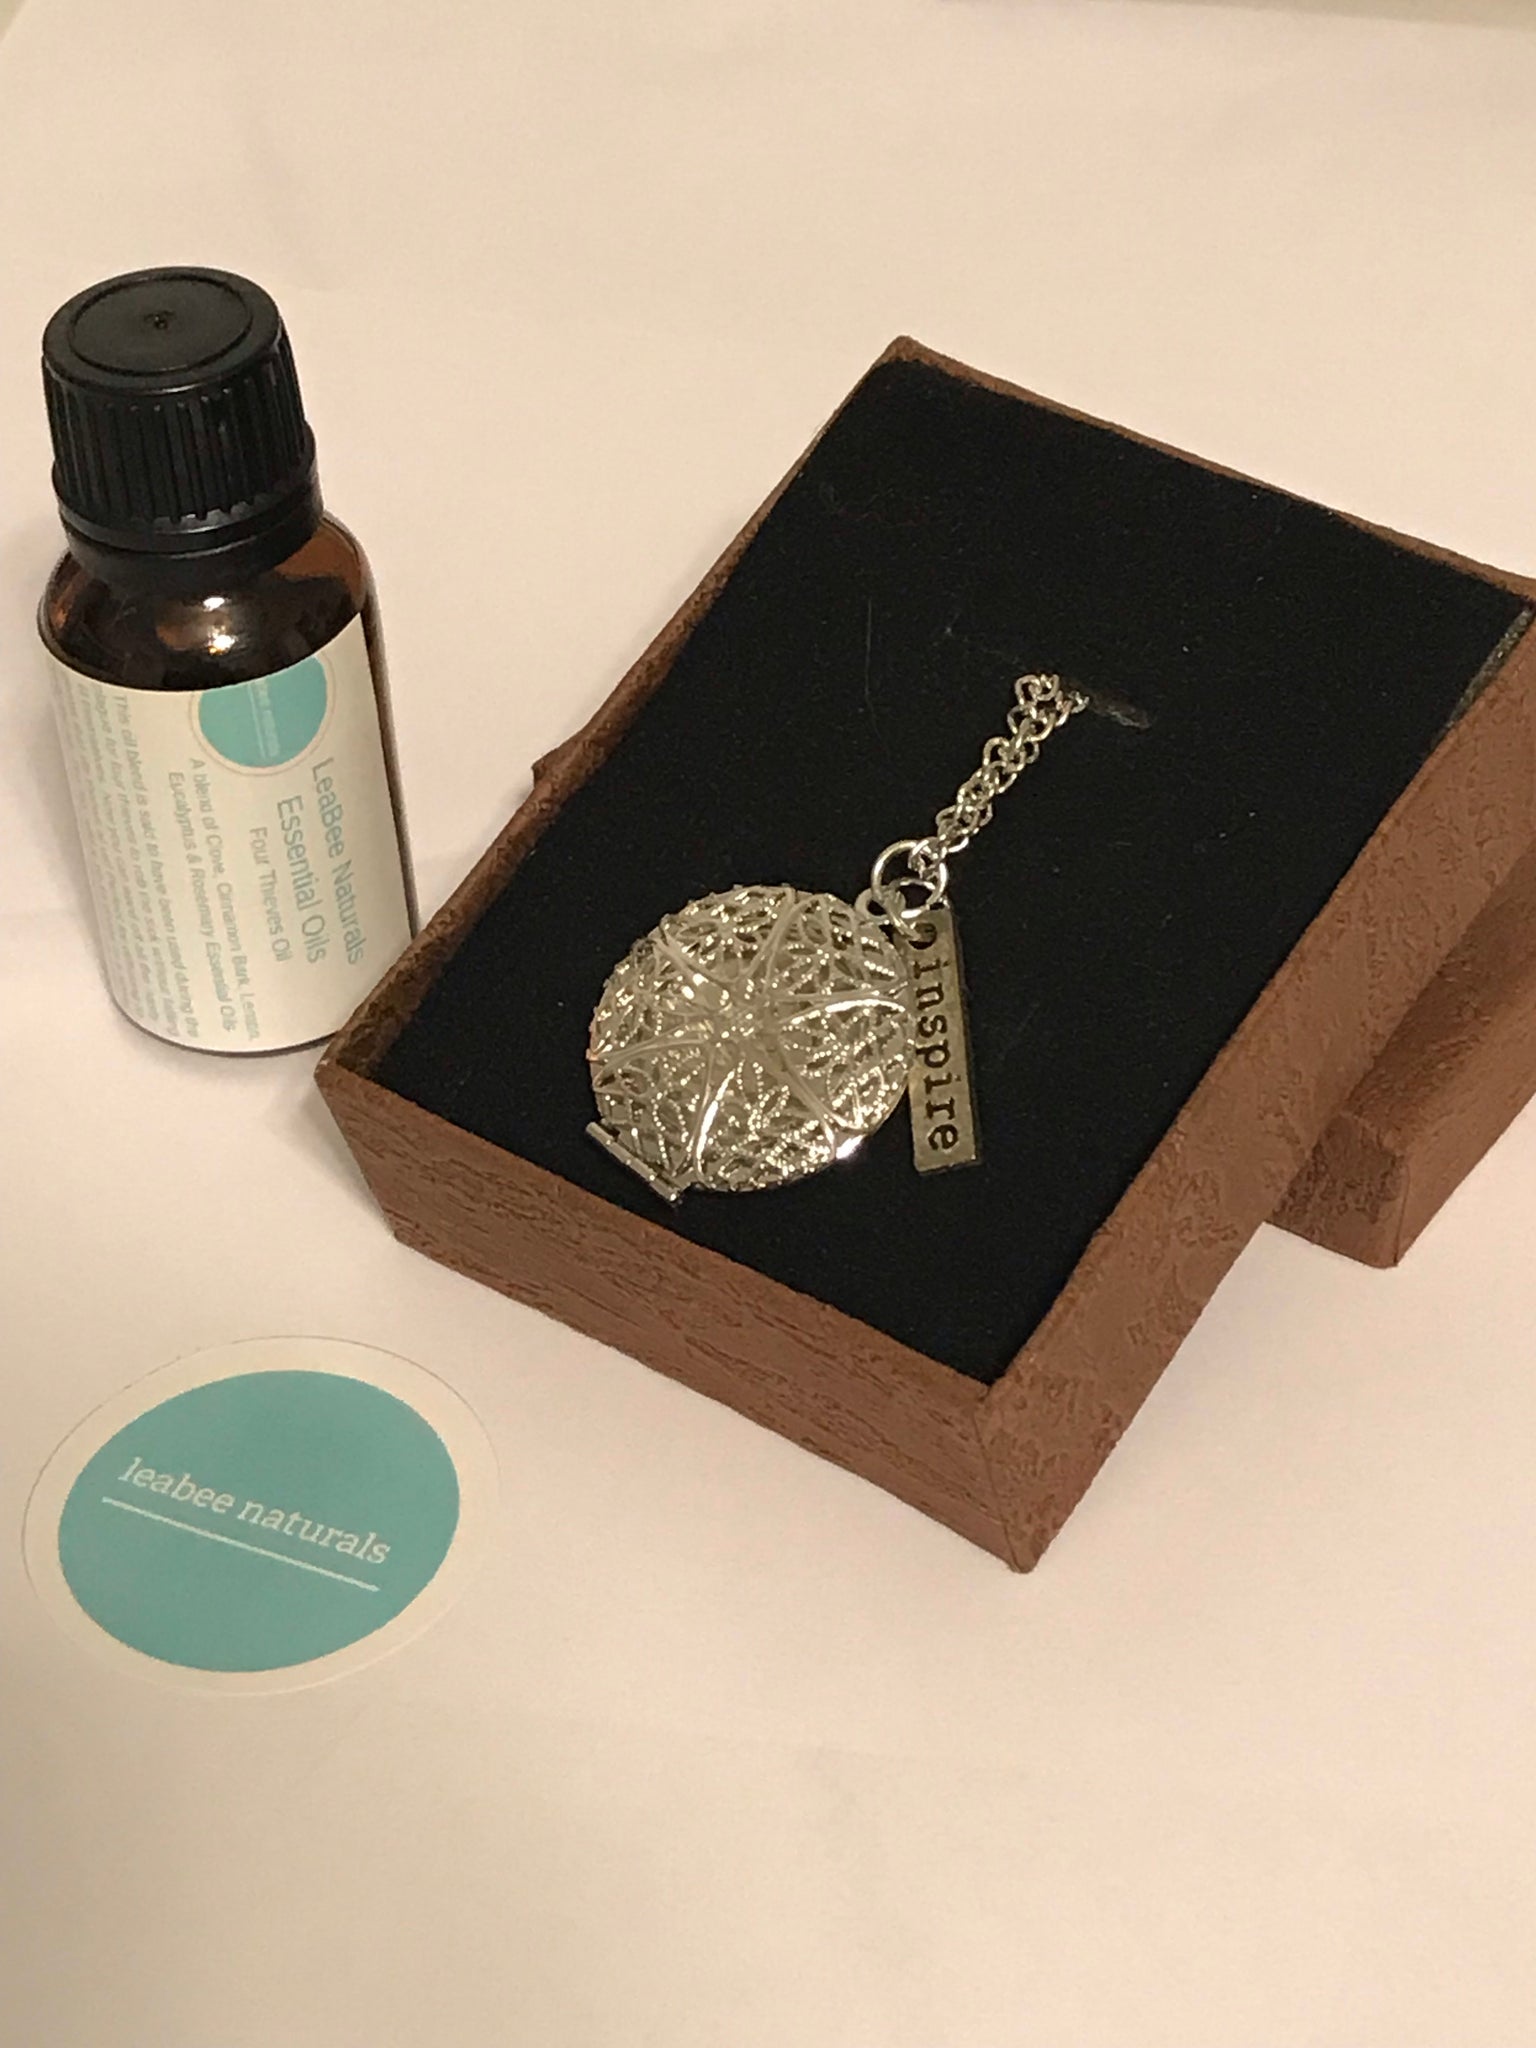 Inspire Silver Plated Diffuser Necklace & Essential Oil Set • 24” necklace • Aromatherapy Diffuser Jewelry • aromatherapy gift set